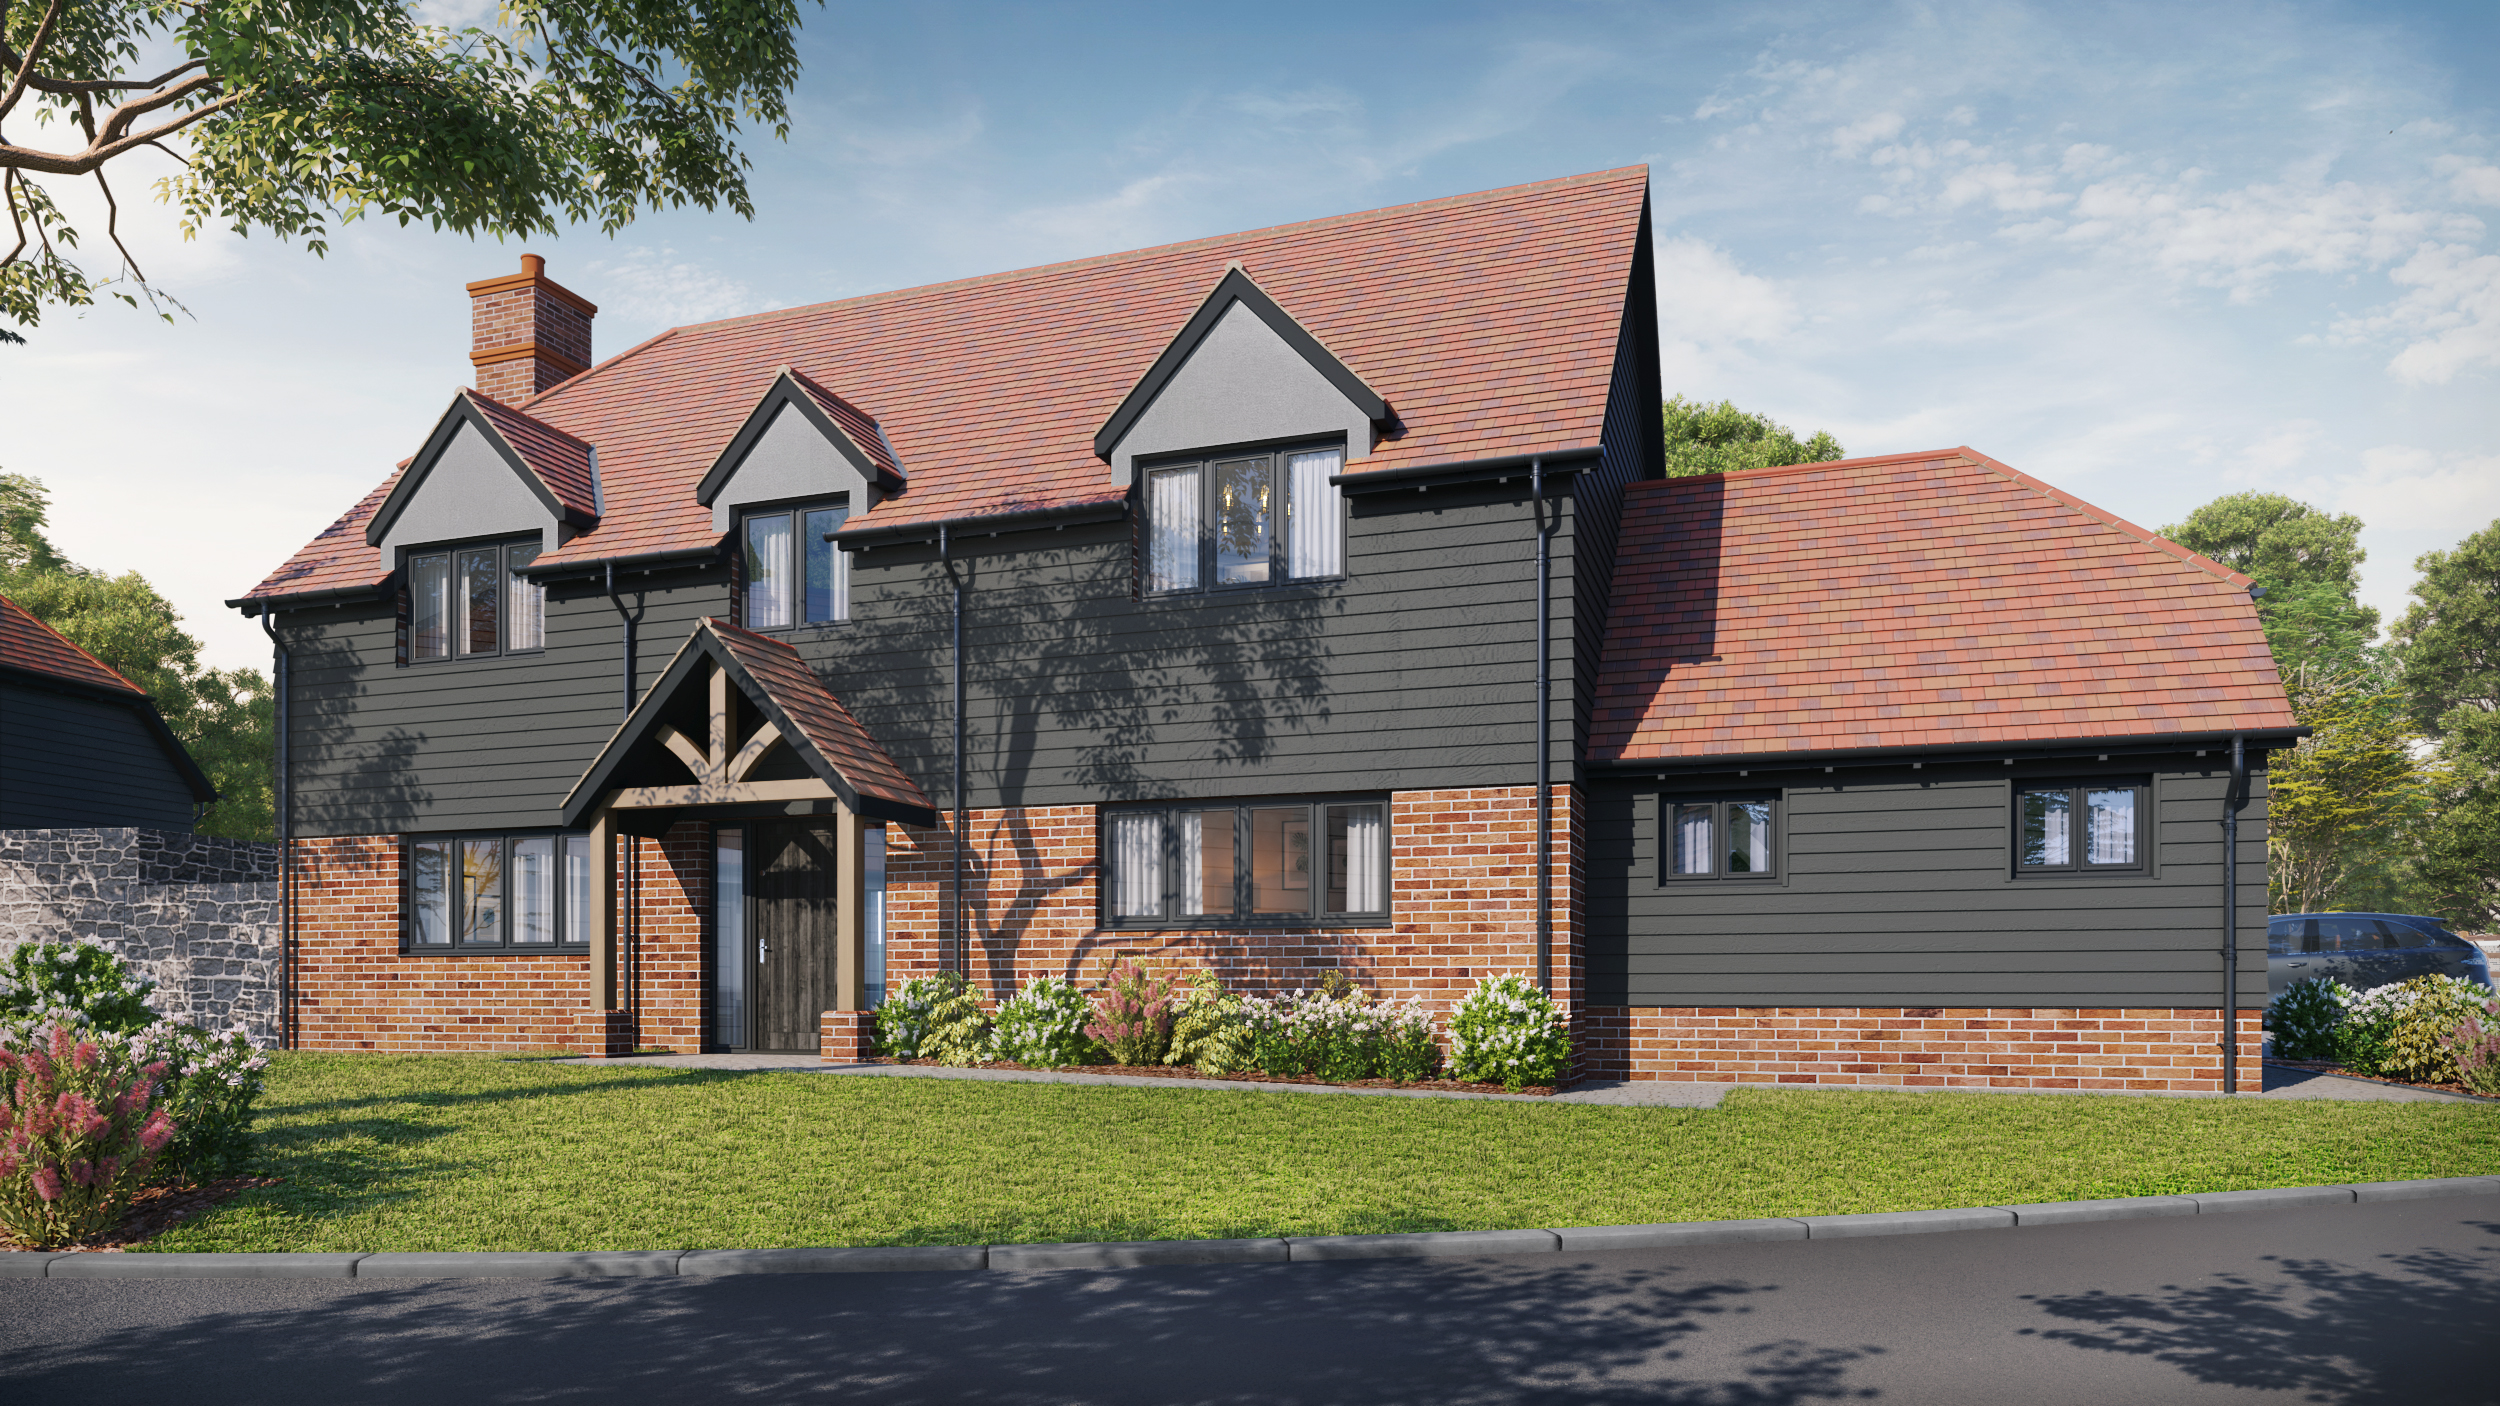 CGI of Detached house with red roof tiles and grey cladding.